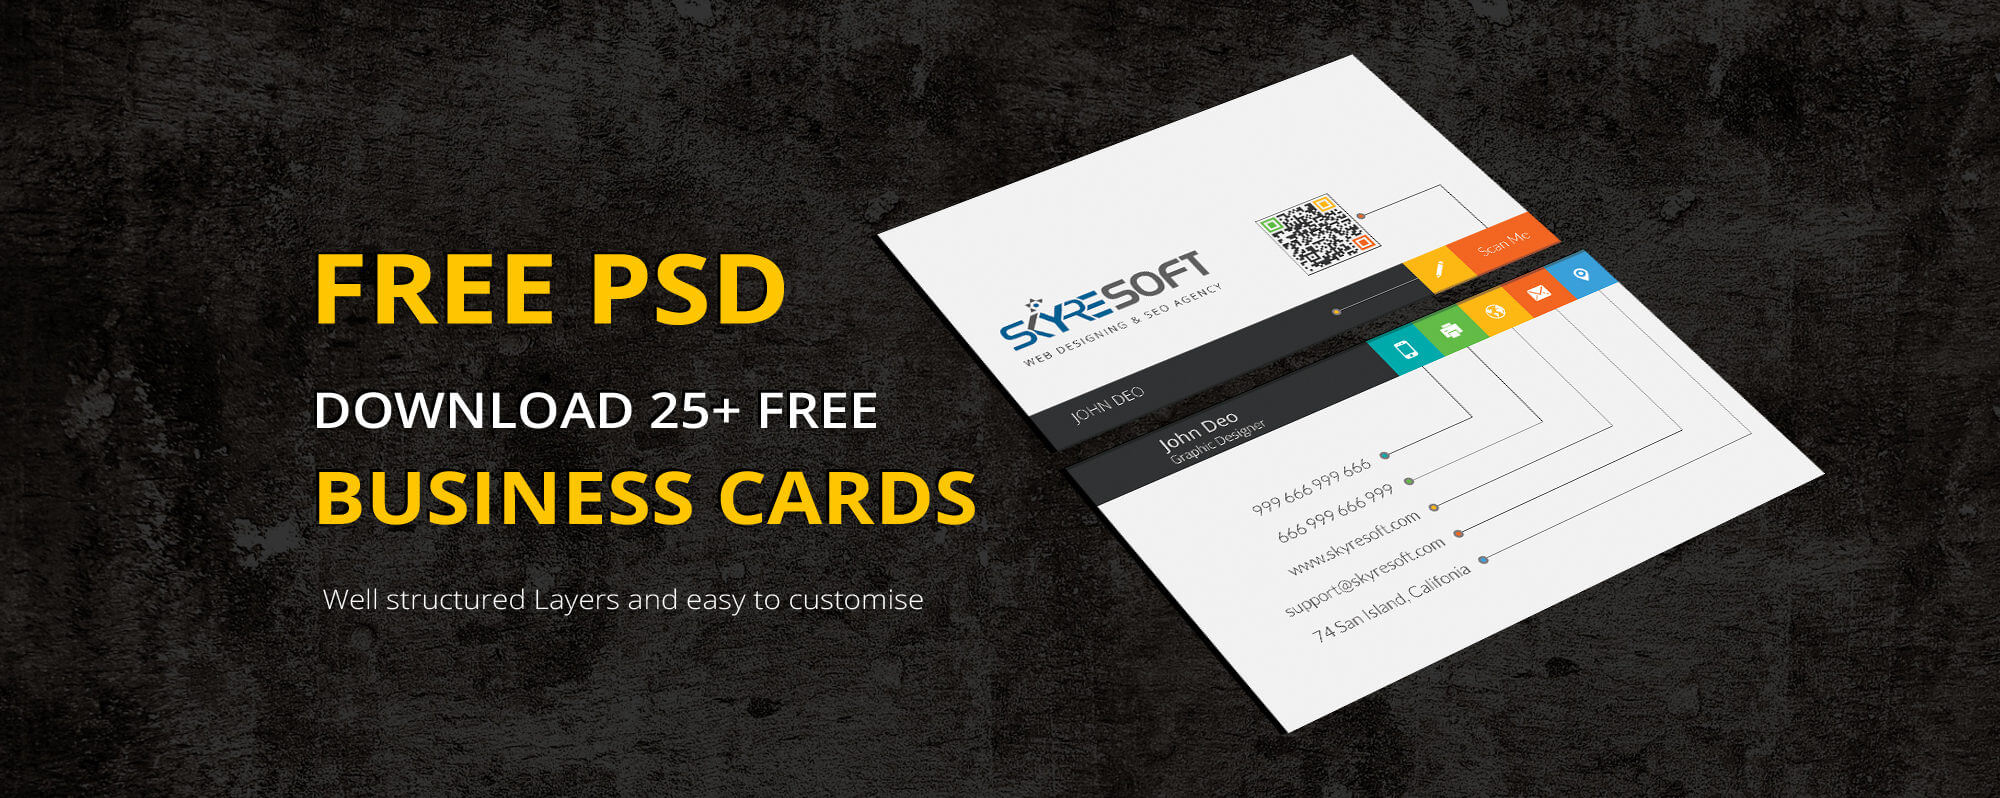 25 Creative Free Psd Business Card Templates 2019 Pertaining To Web Design Business Cards Templates